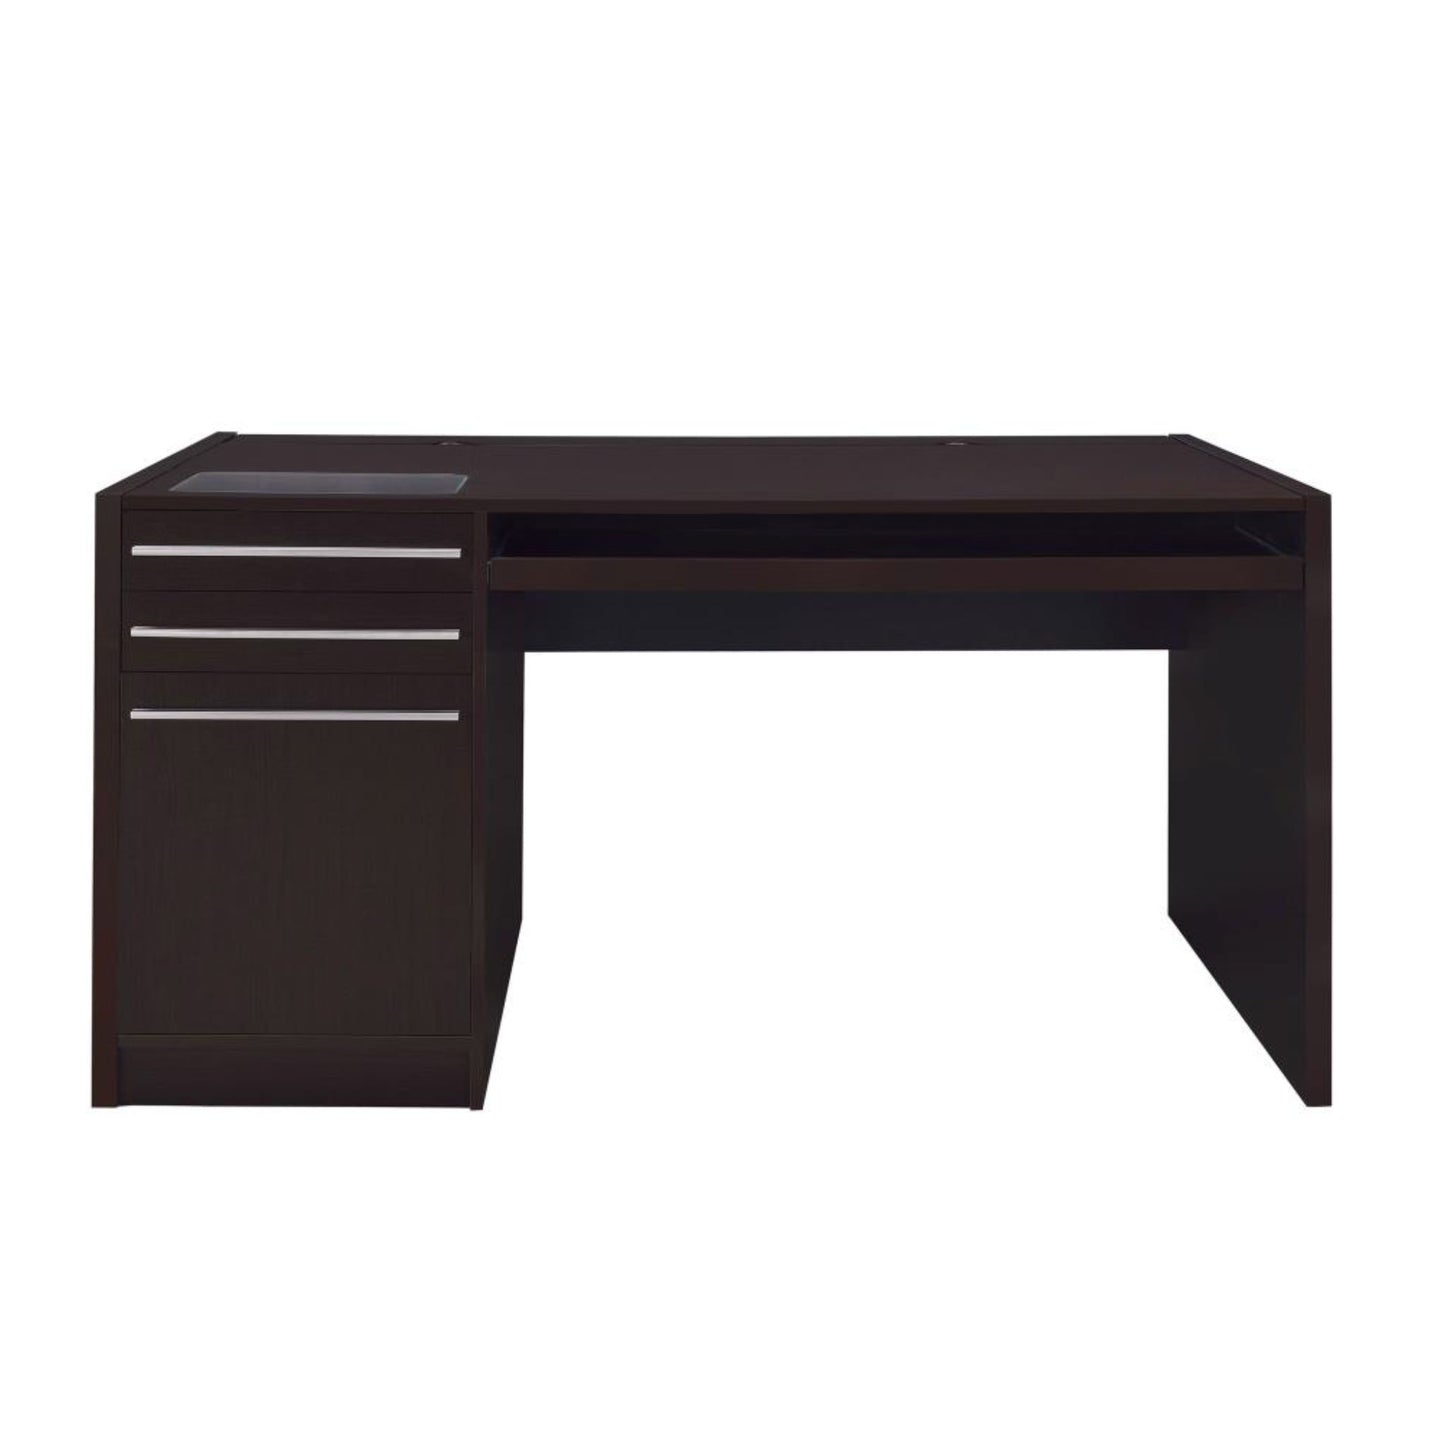 HALSTON 3-drawer Connect-it Office Desk Cappuccino